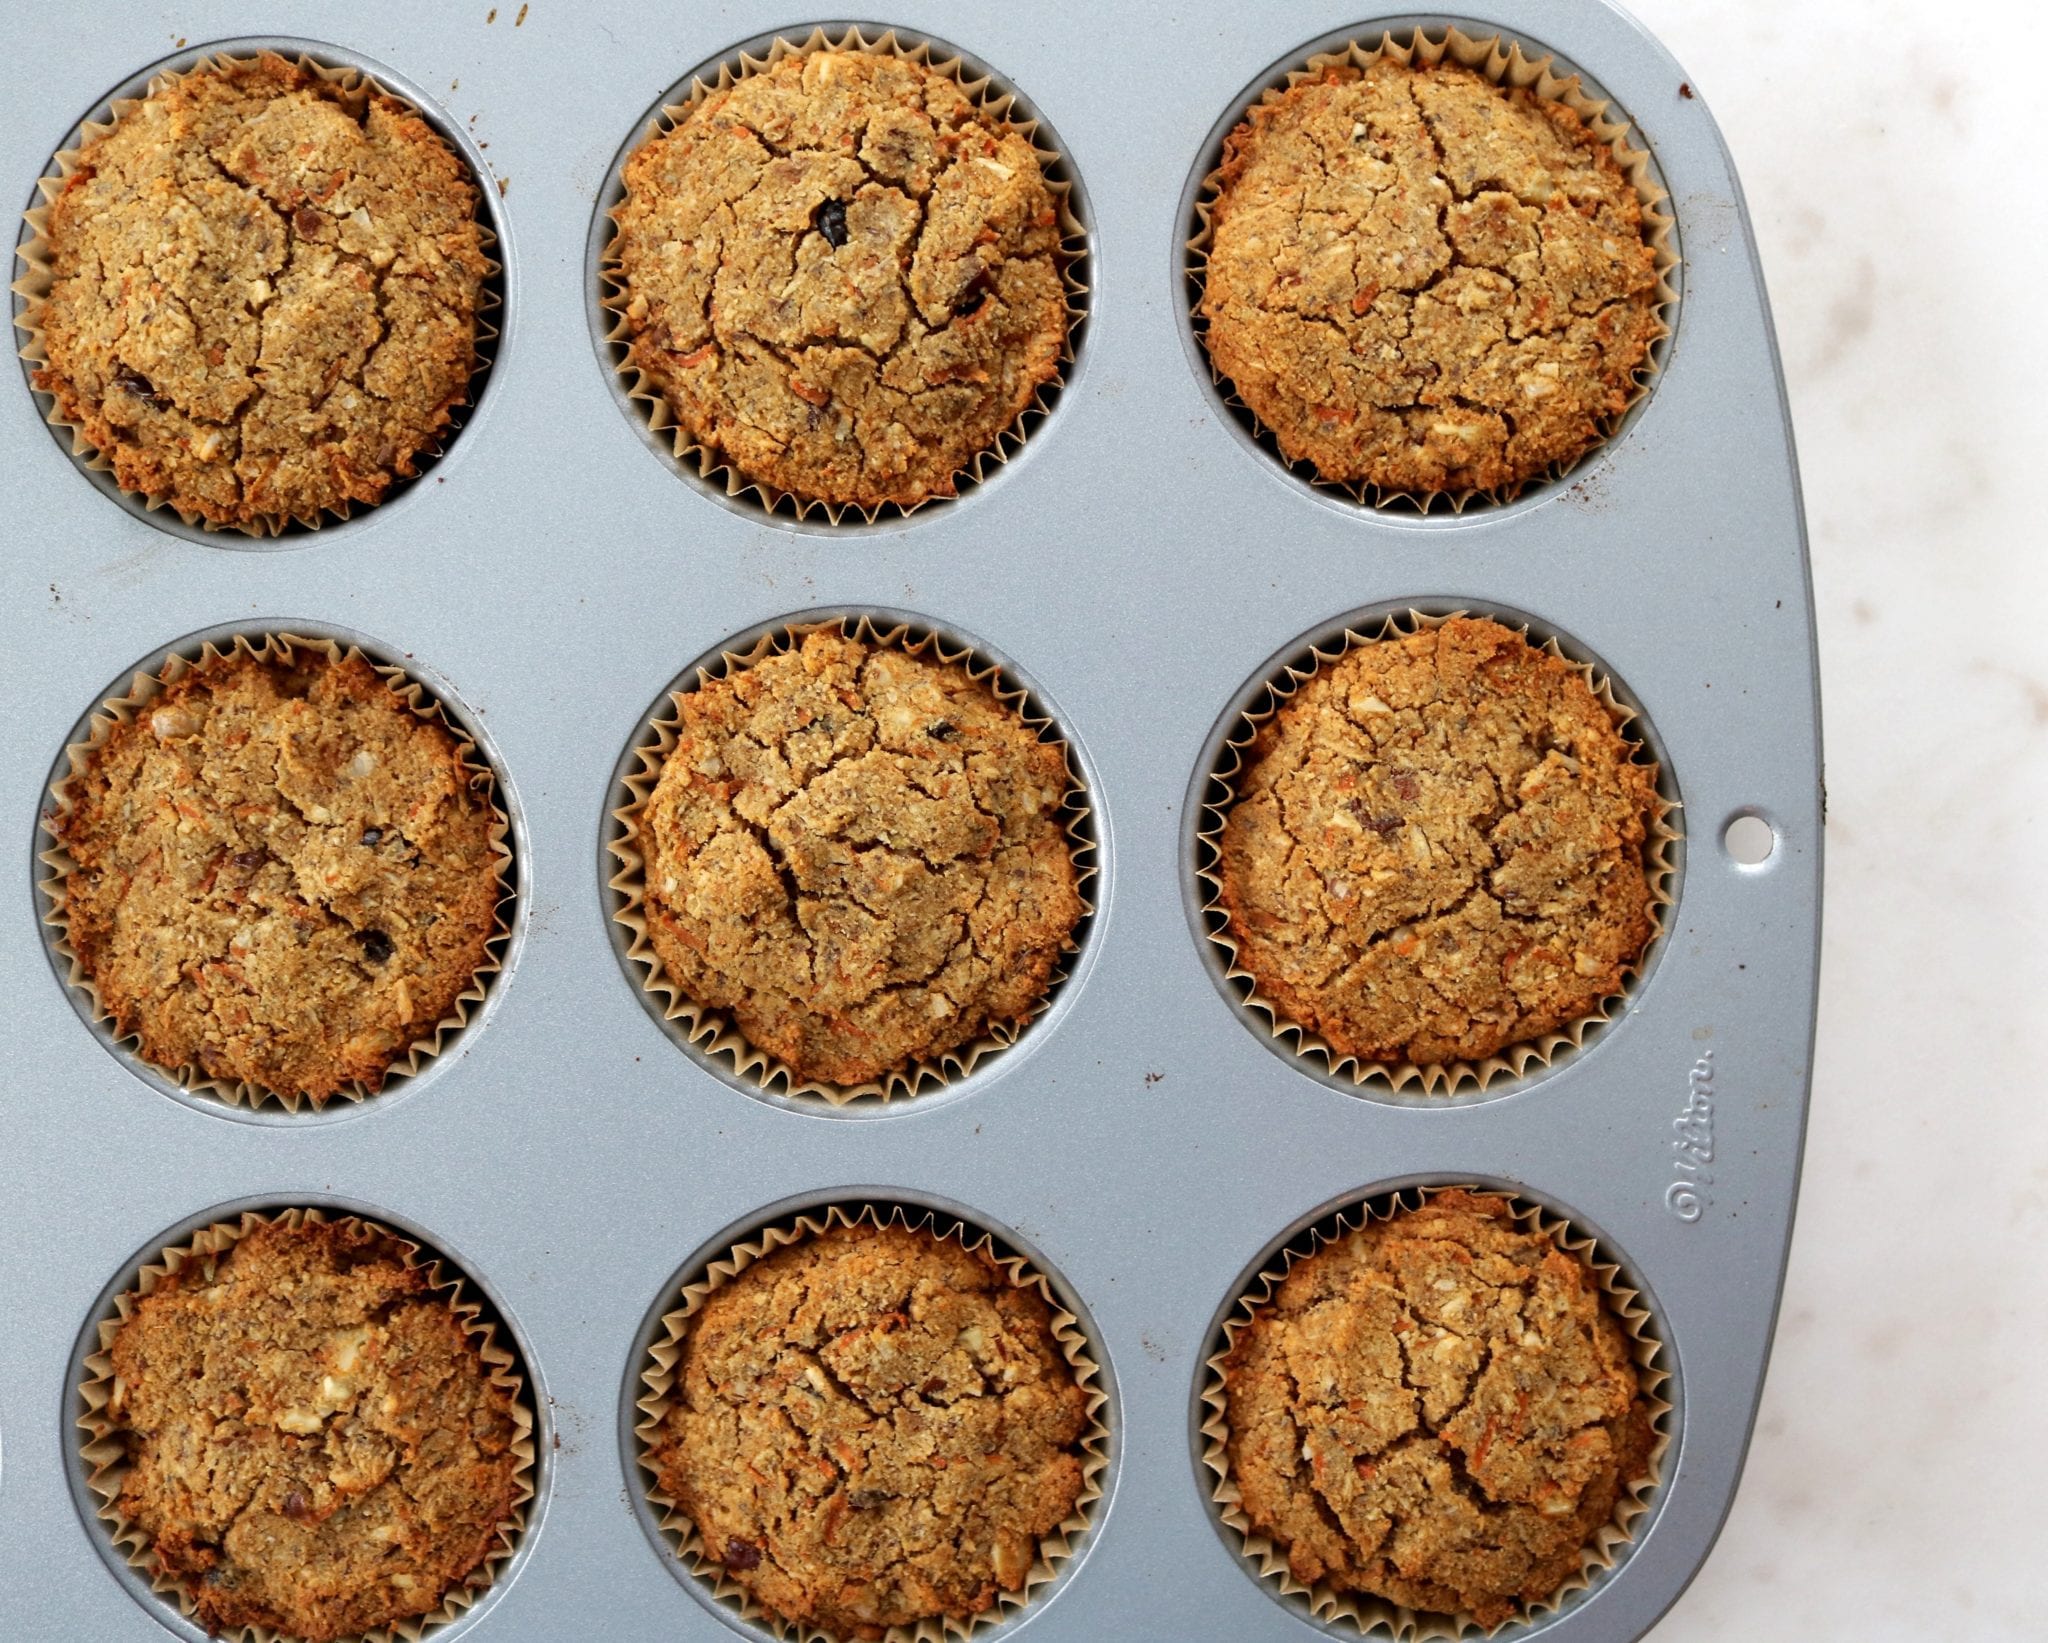 The Carrot Muffins You Should Add To Your Weekly Menu